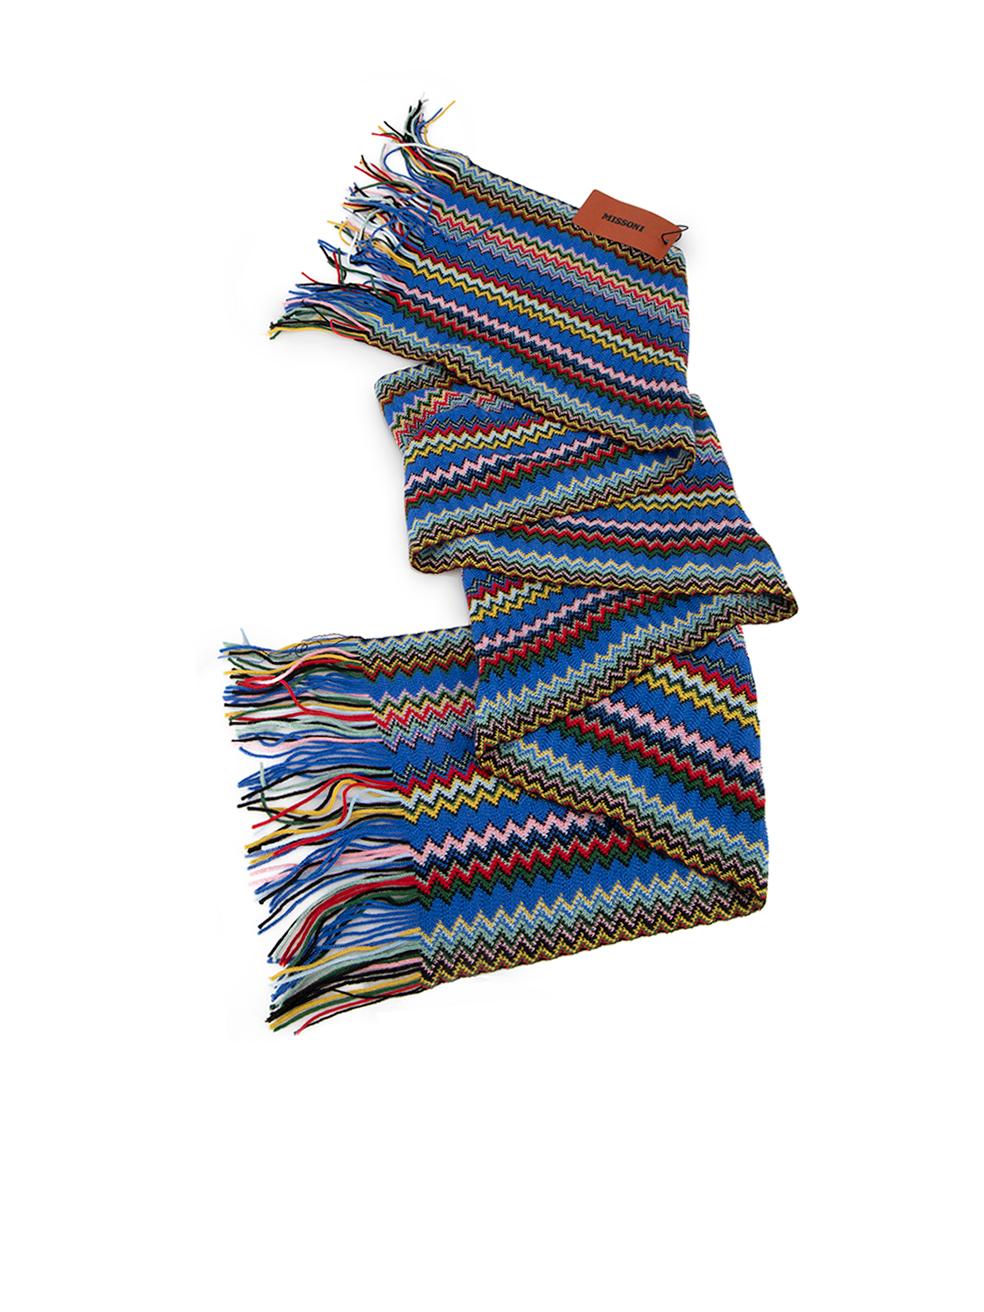 CONDITION is Never worn, with tags. No visible wear to scarf is evident on this new Missoni designer resale item.



Details


Multicolour

Wool

Knitted scarf

Zig zag pattern

Tassel on edges





Made in Italy



Composition

50% Wool and 50%